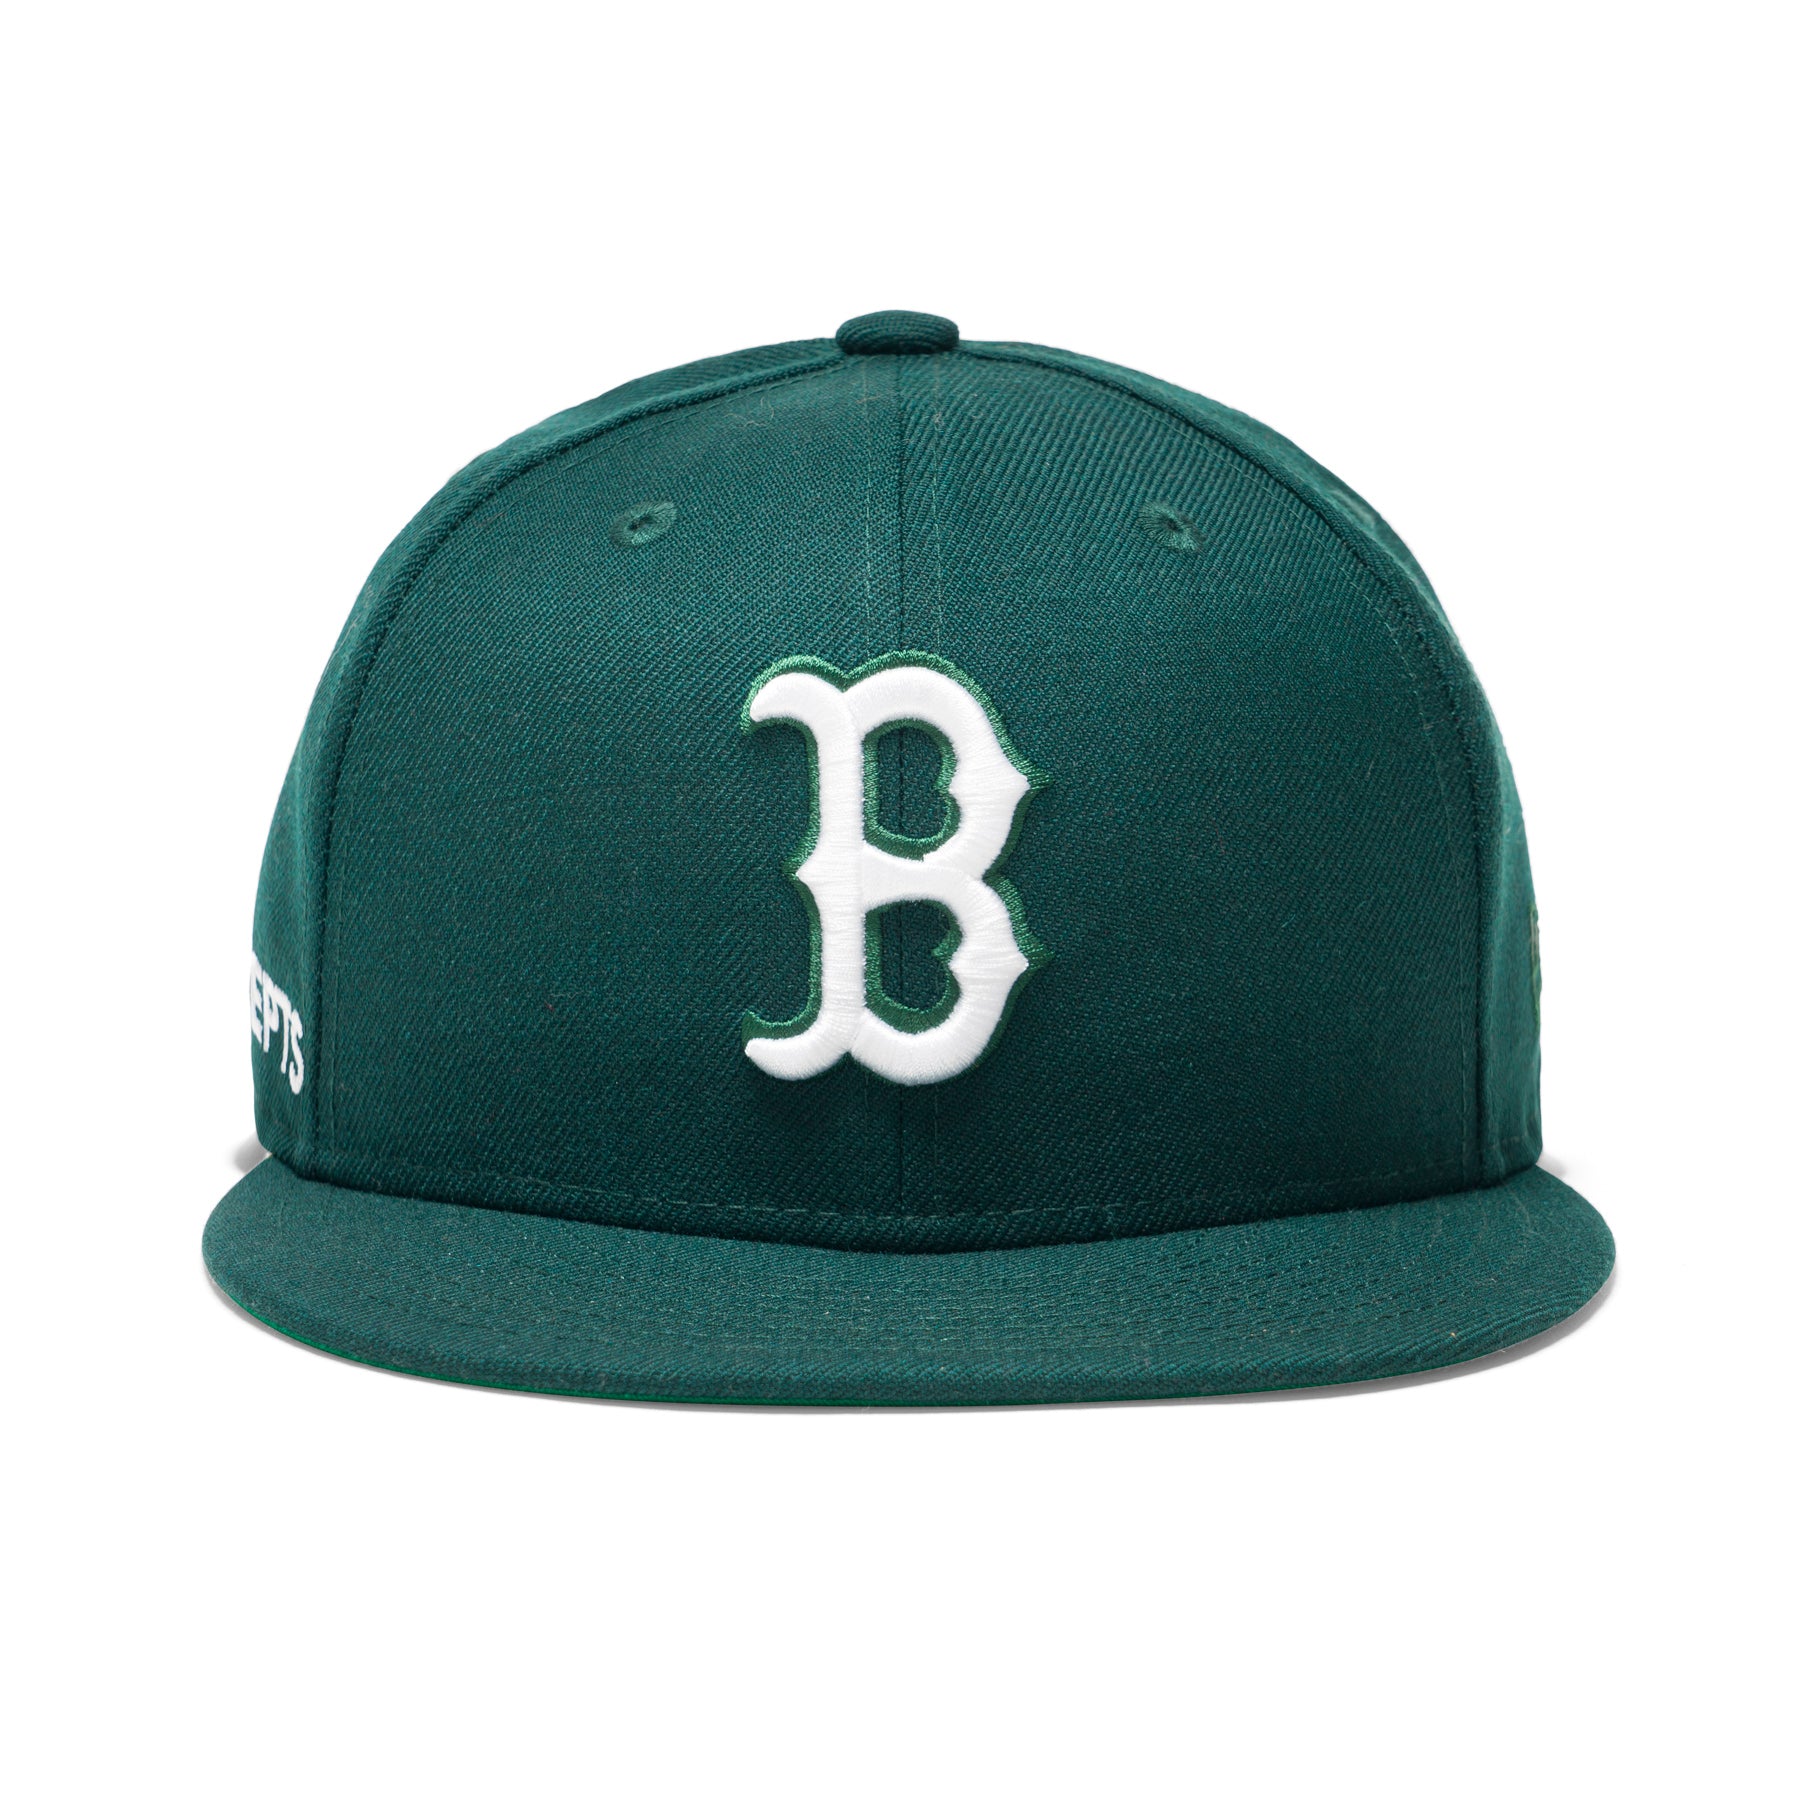 Concepts x New Era 5950 Boston Red Sox Fitted Hat (Dark Green) 7 1/2